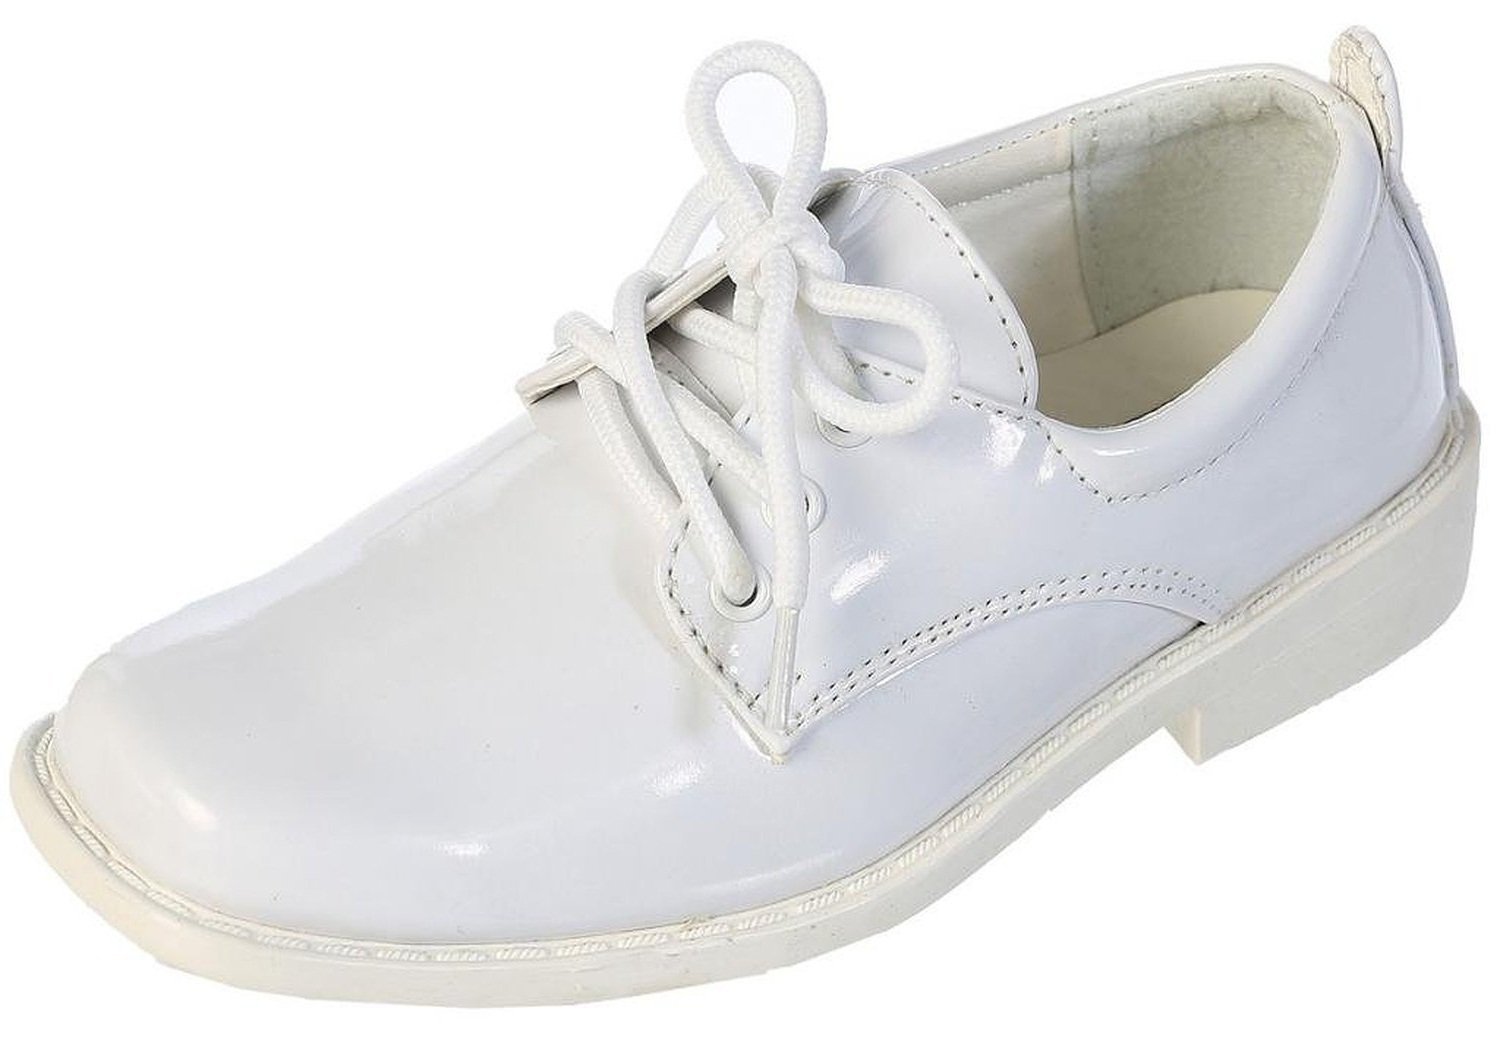 Boys Square Toe Lace Up Oxford Patent Dress Shoes - Available in White 2 Little Kid